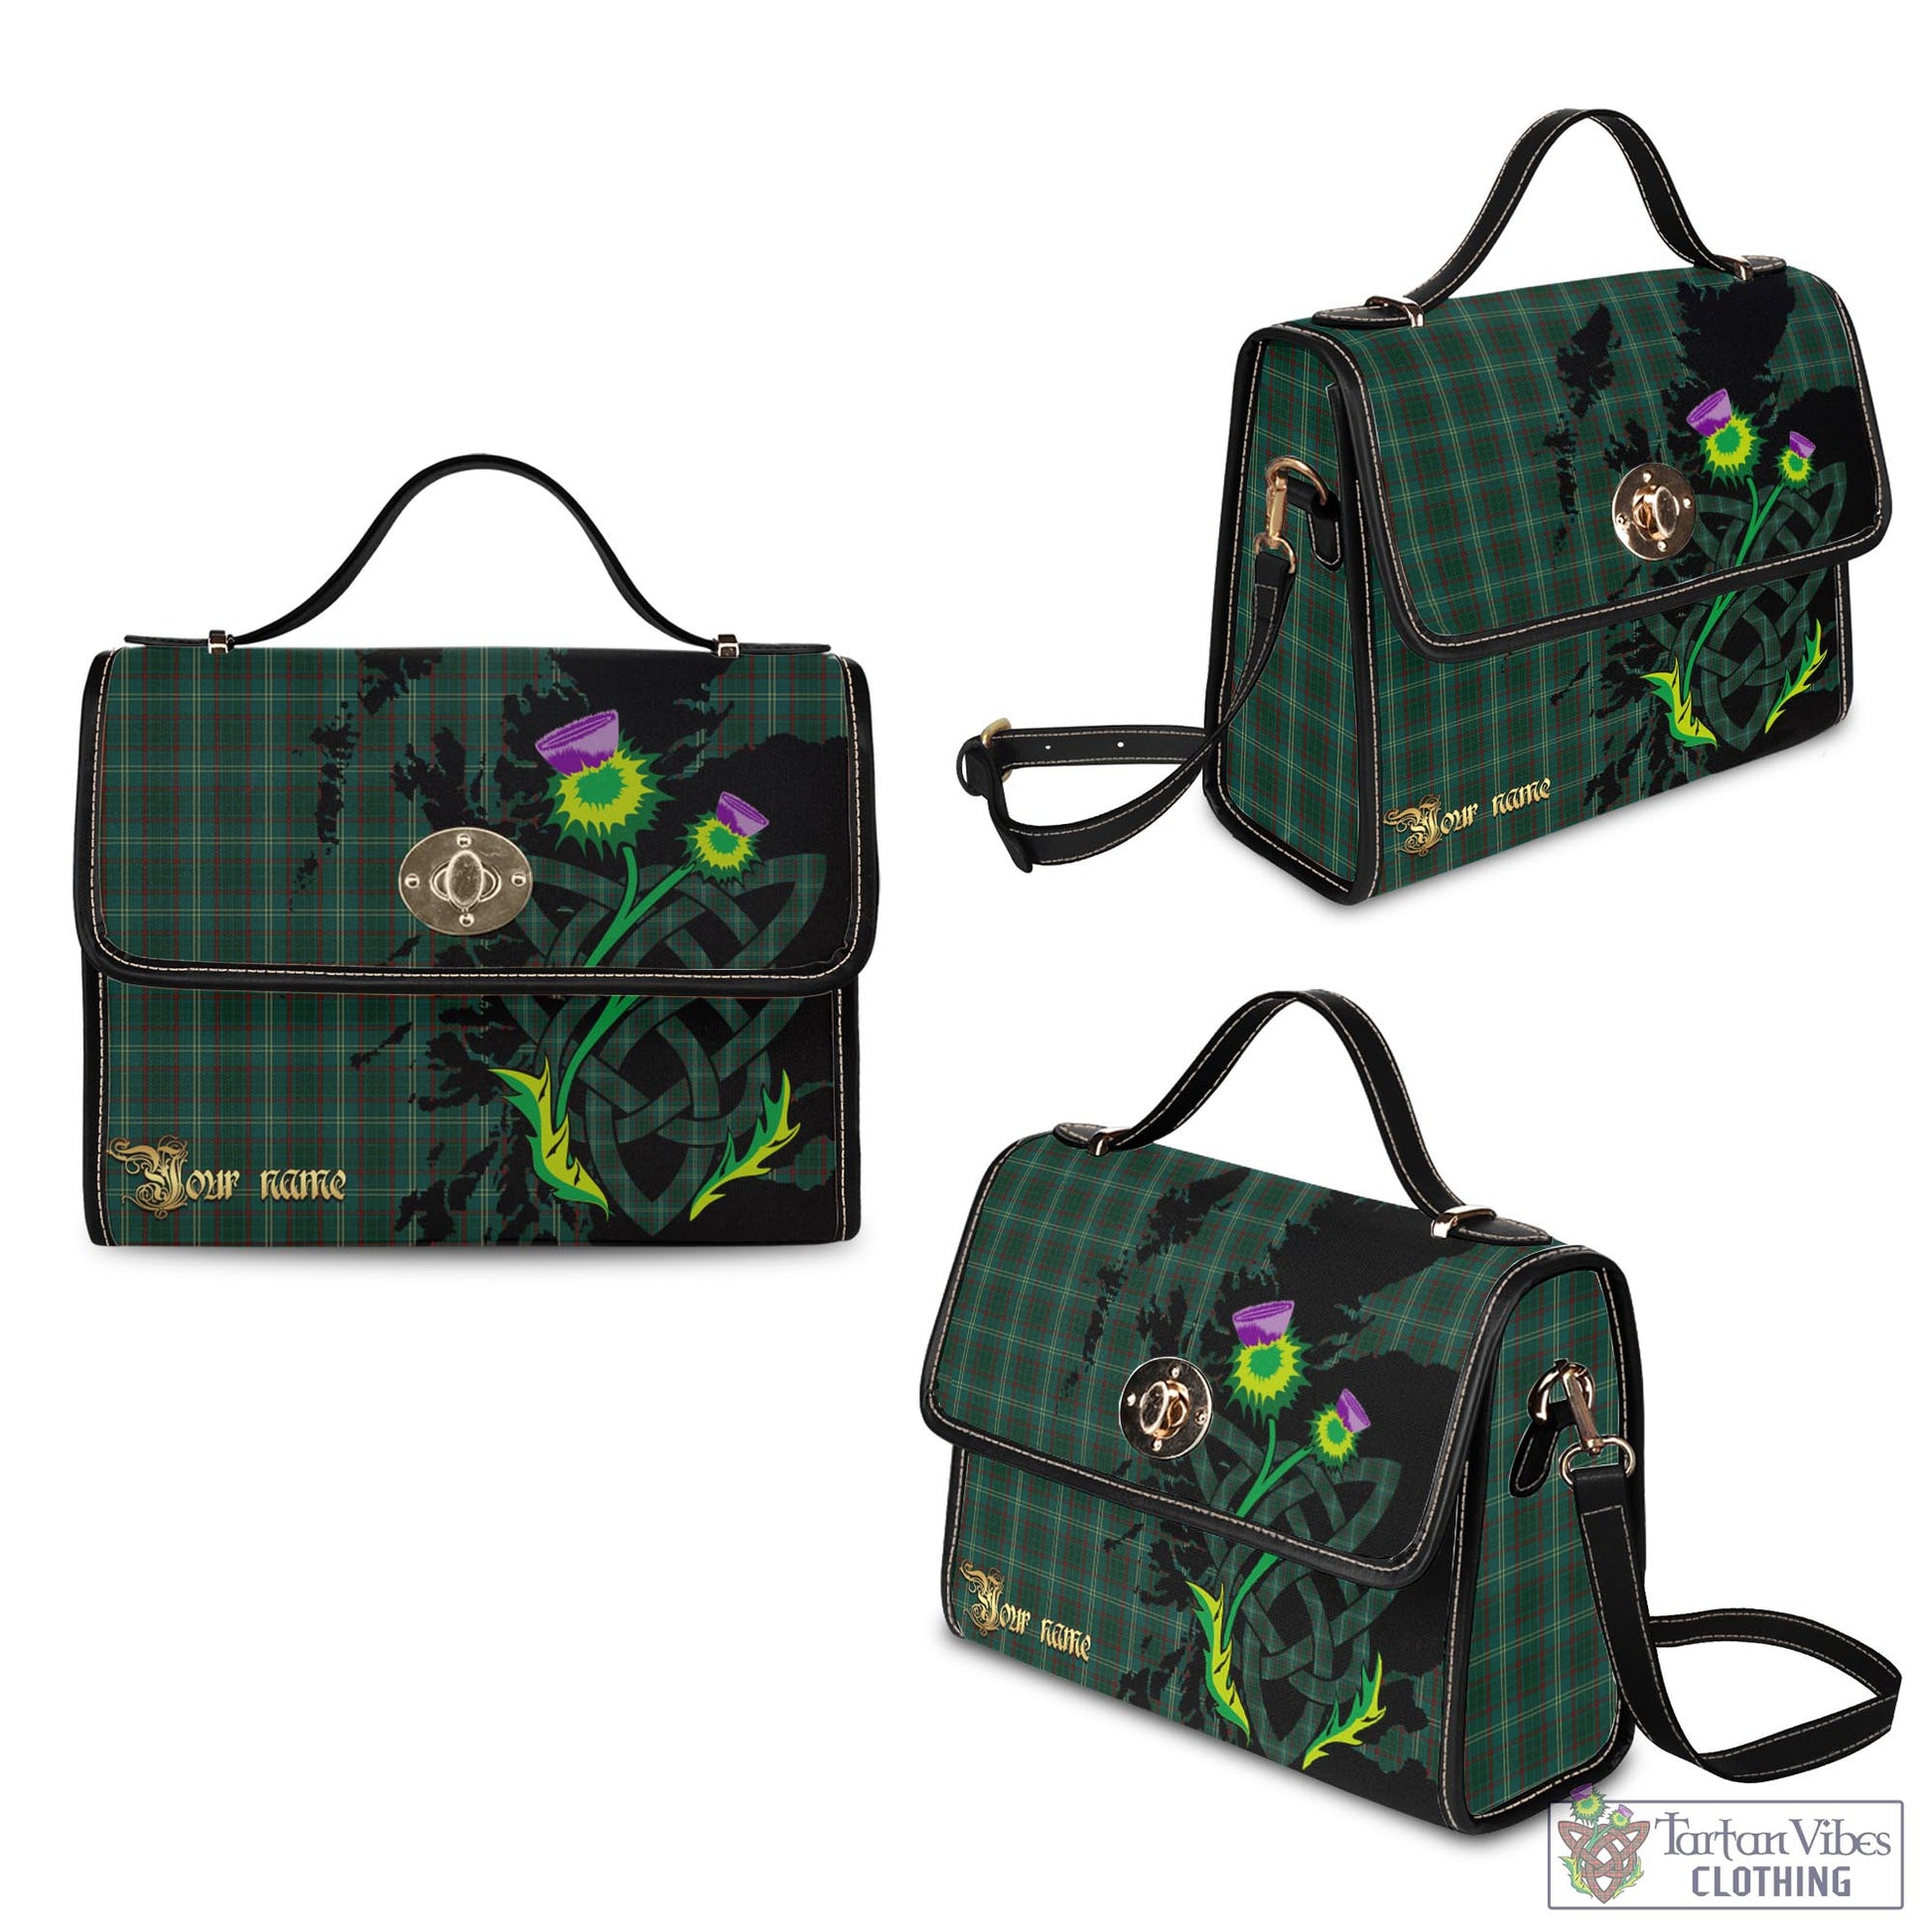 Tartan Vibes Clothing Armagh County Ireland Tartan Waterproof Canvas Bag with Scotland Map and Thistle Celtic Accents